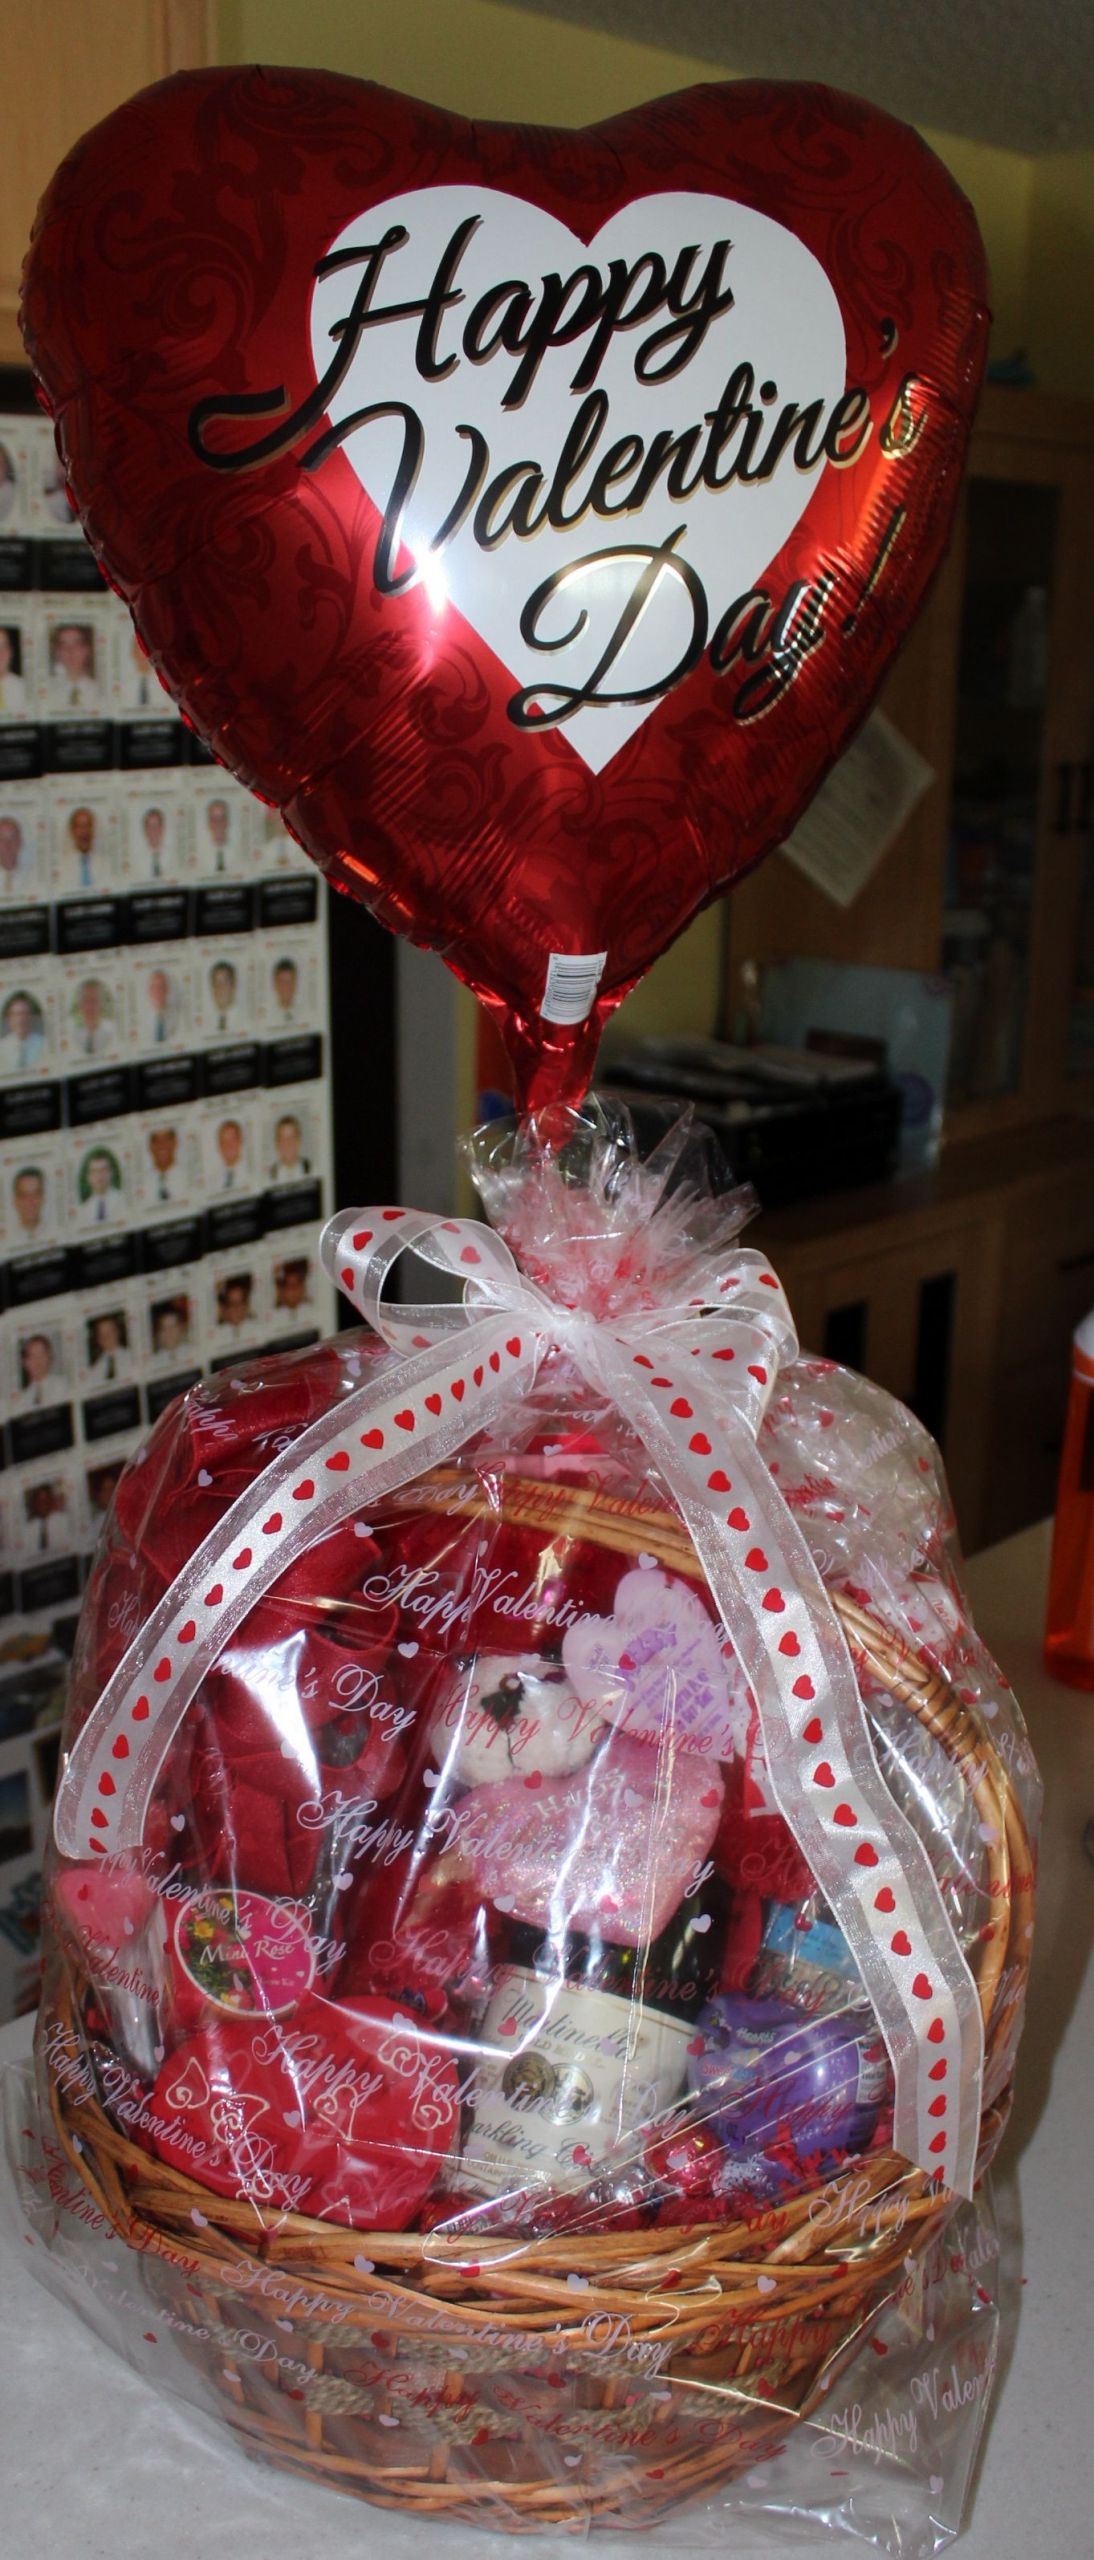 Valentines Gift For Her Ideas
 47 How To Make A Valentine Gift Basket For Her Best Idea